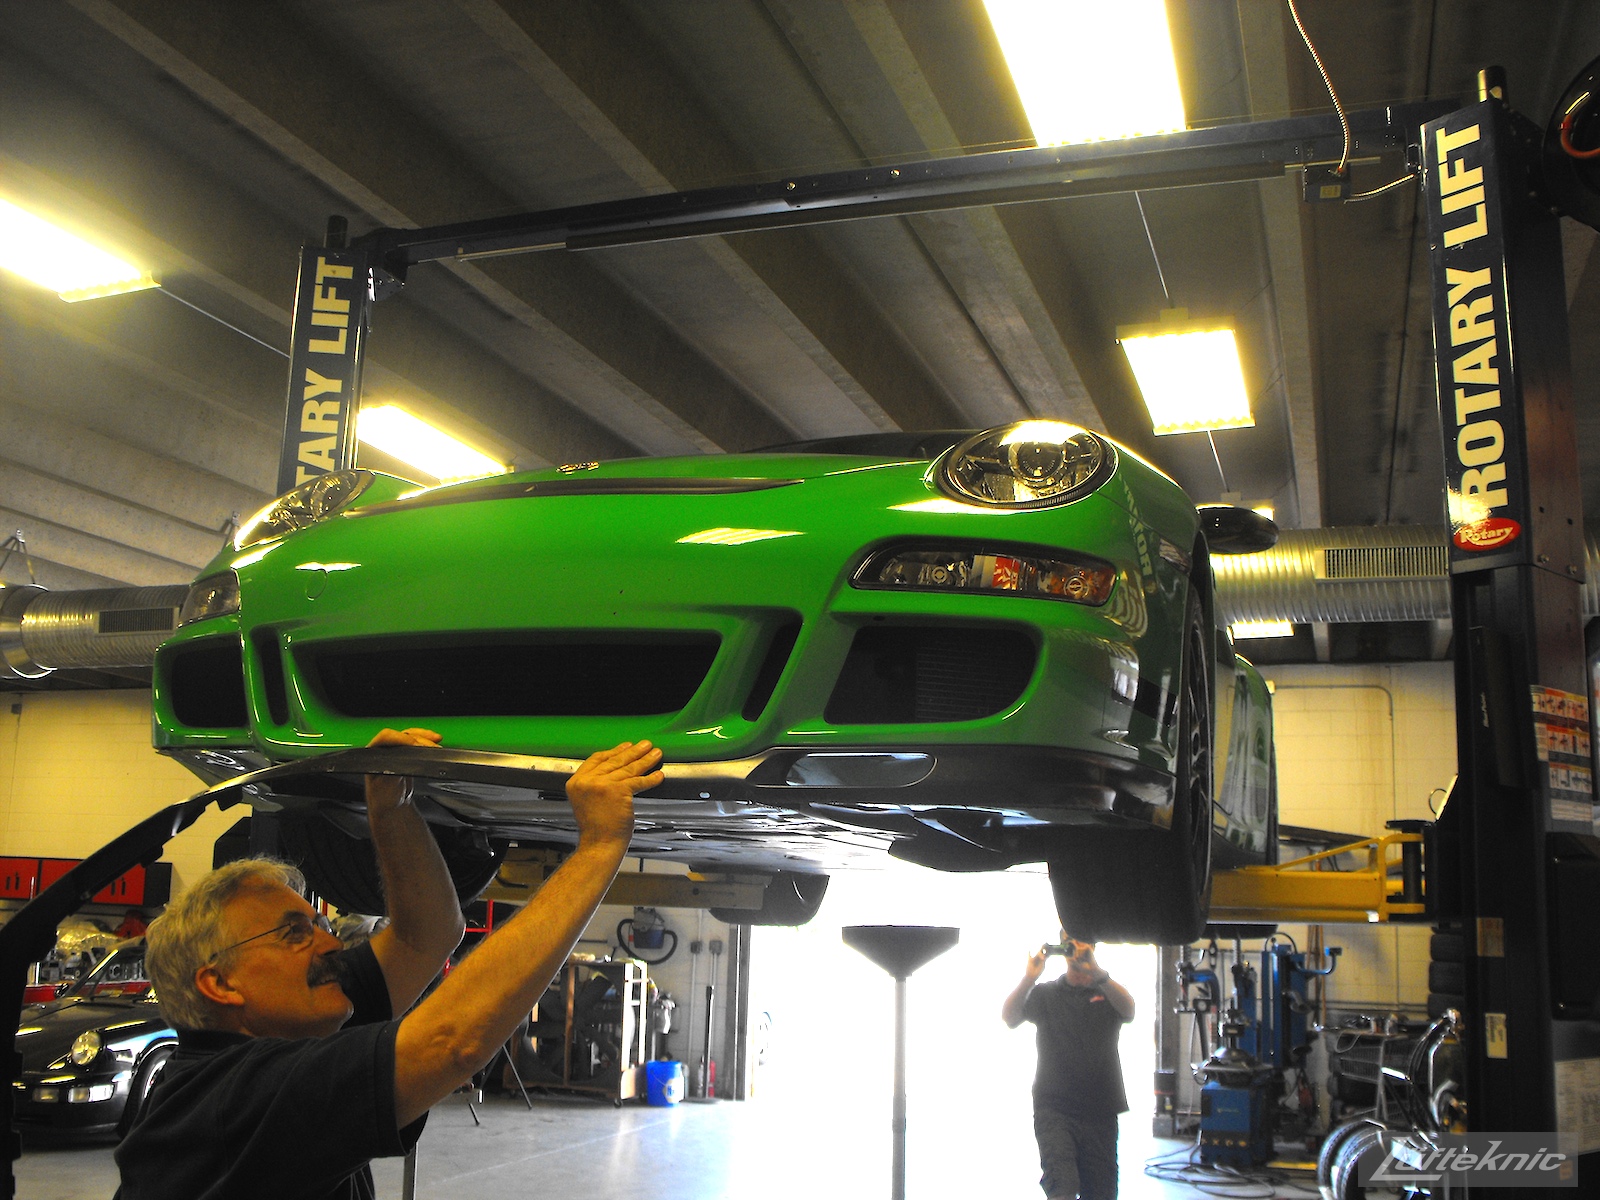 A Lufteknic employee removes the lower chin spoiler from a green Porsche 997.1 GT3 RS.